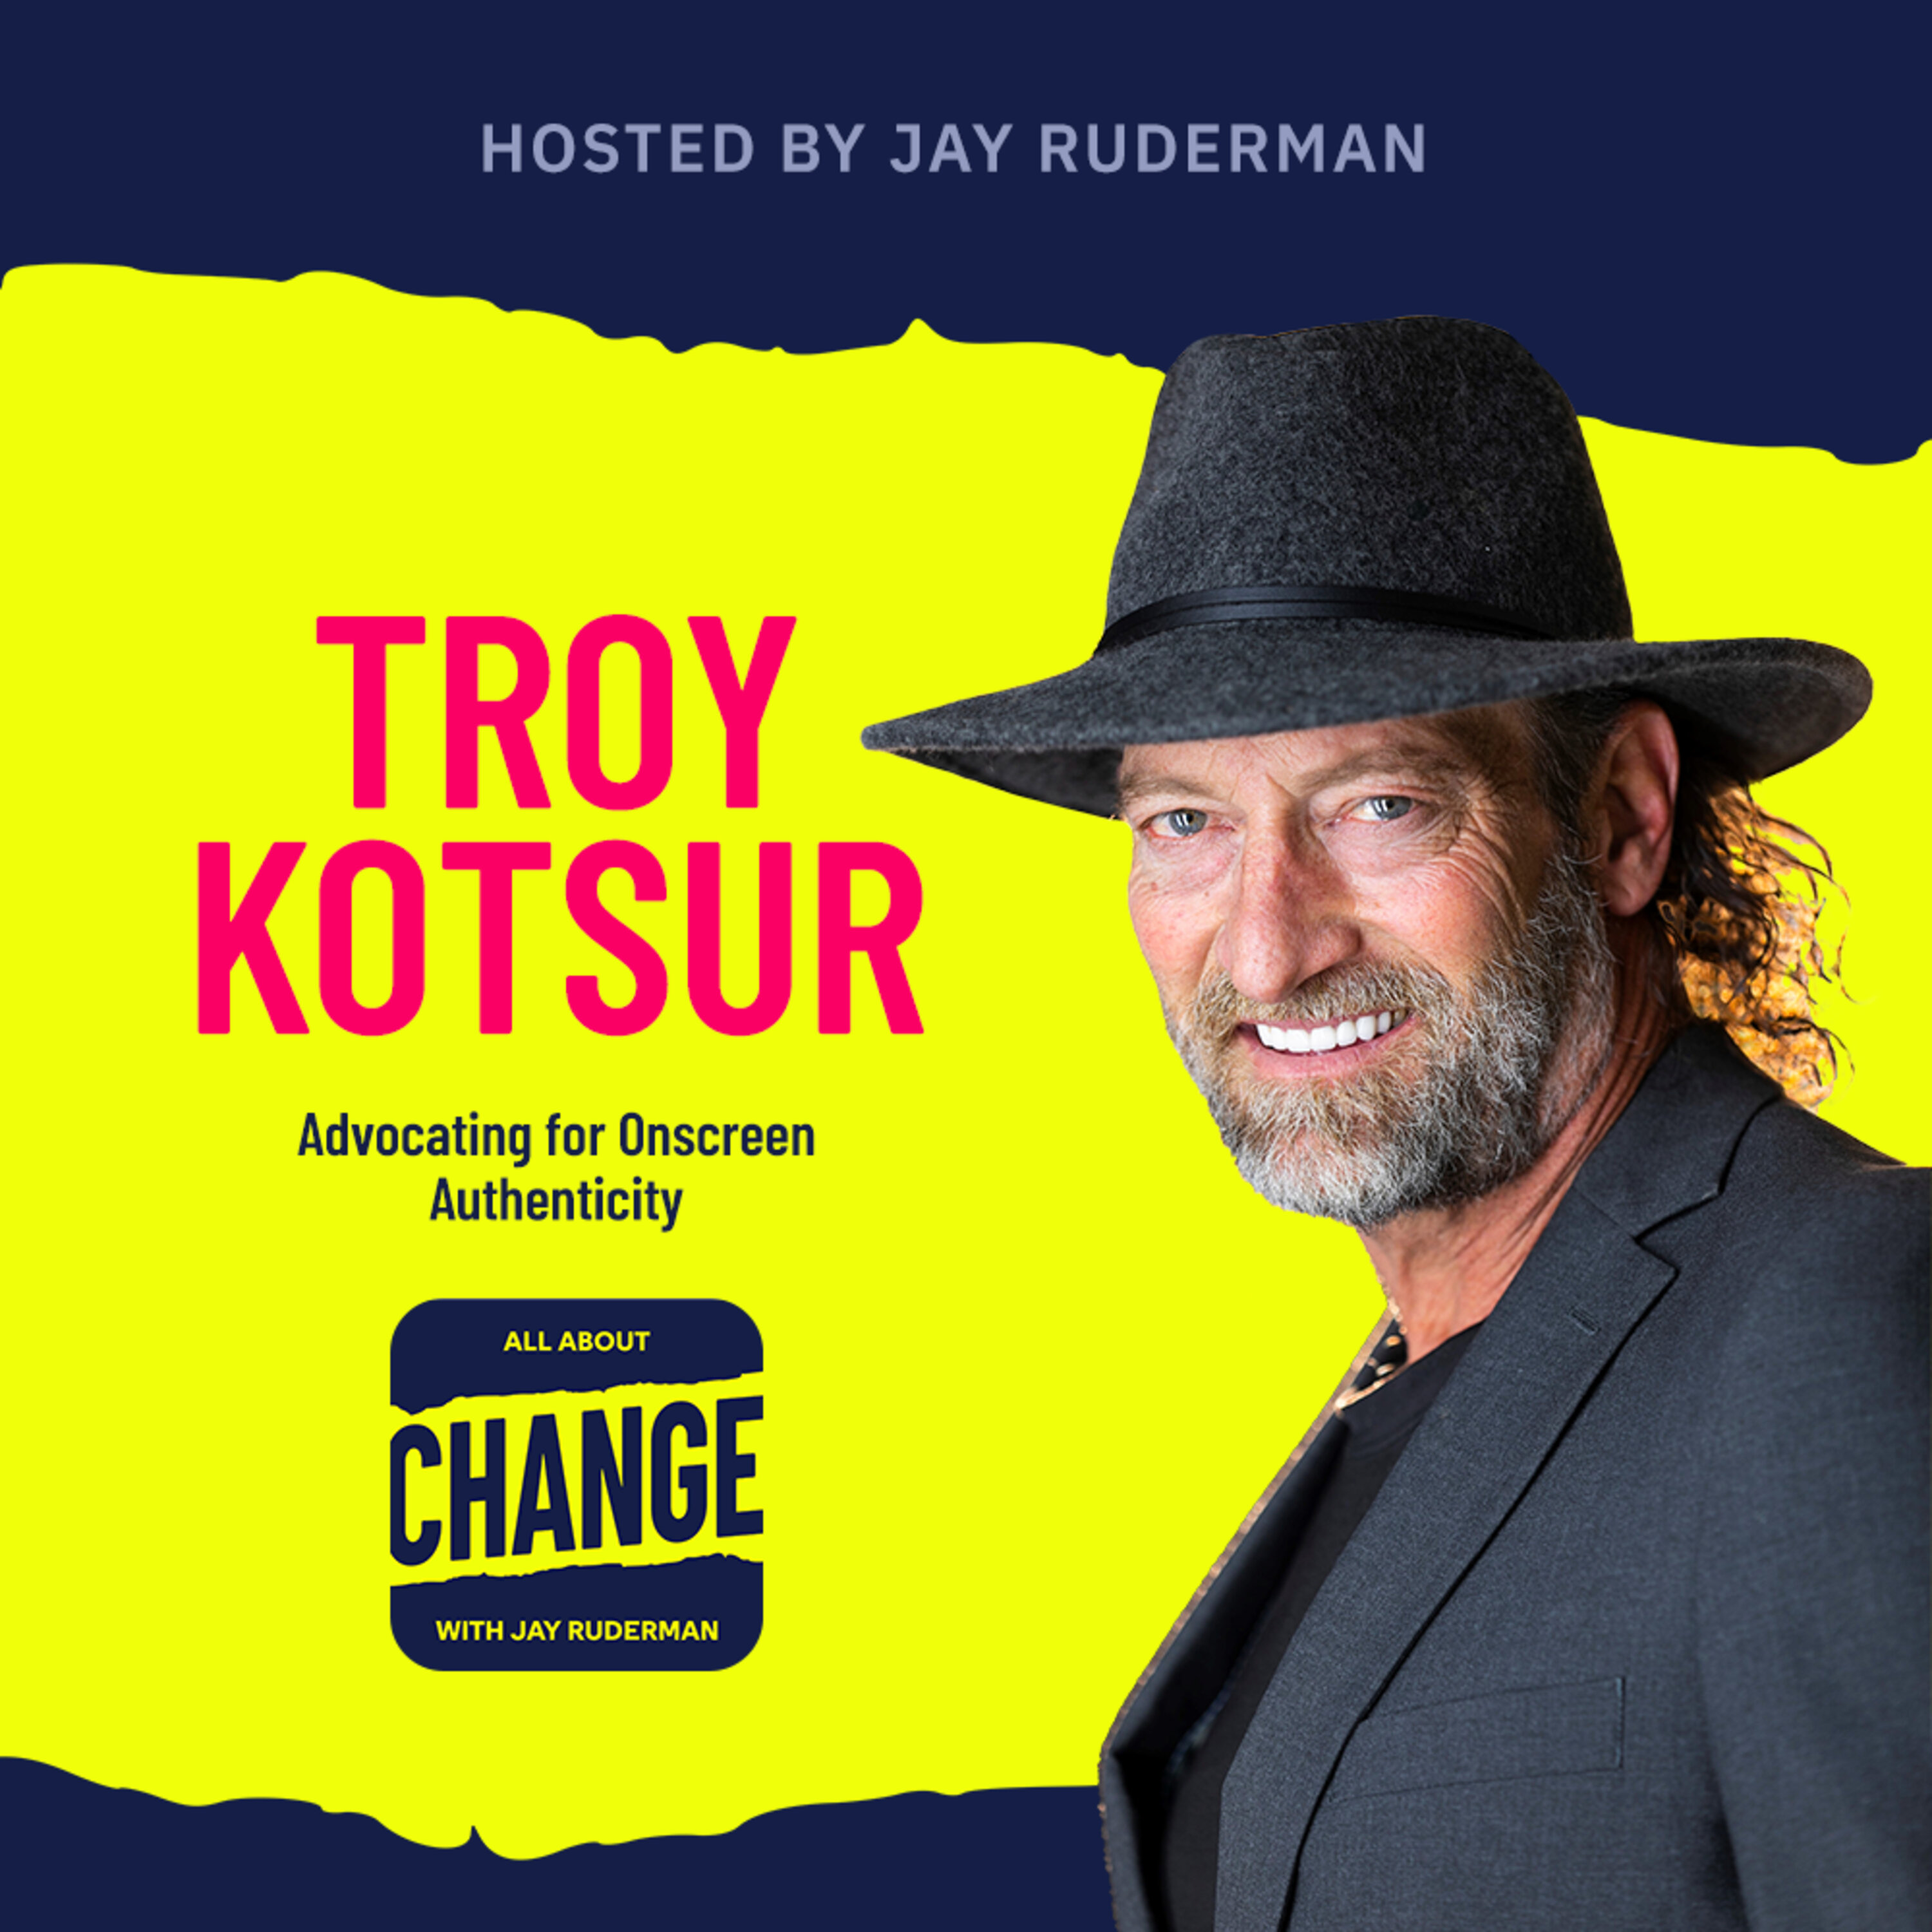 Troy Kotsur - Advocating for Onscreen Authenticity by Jay Ruderman